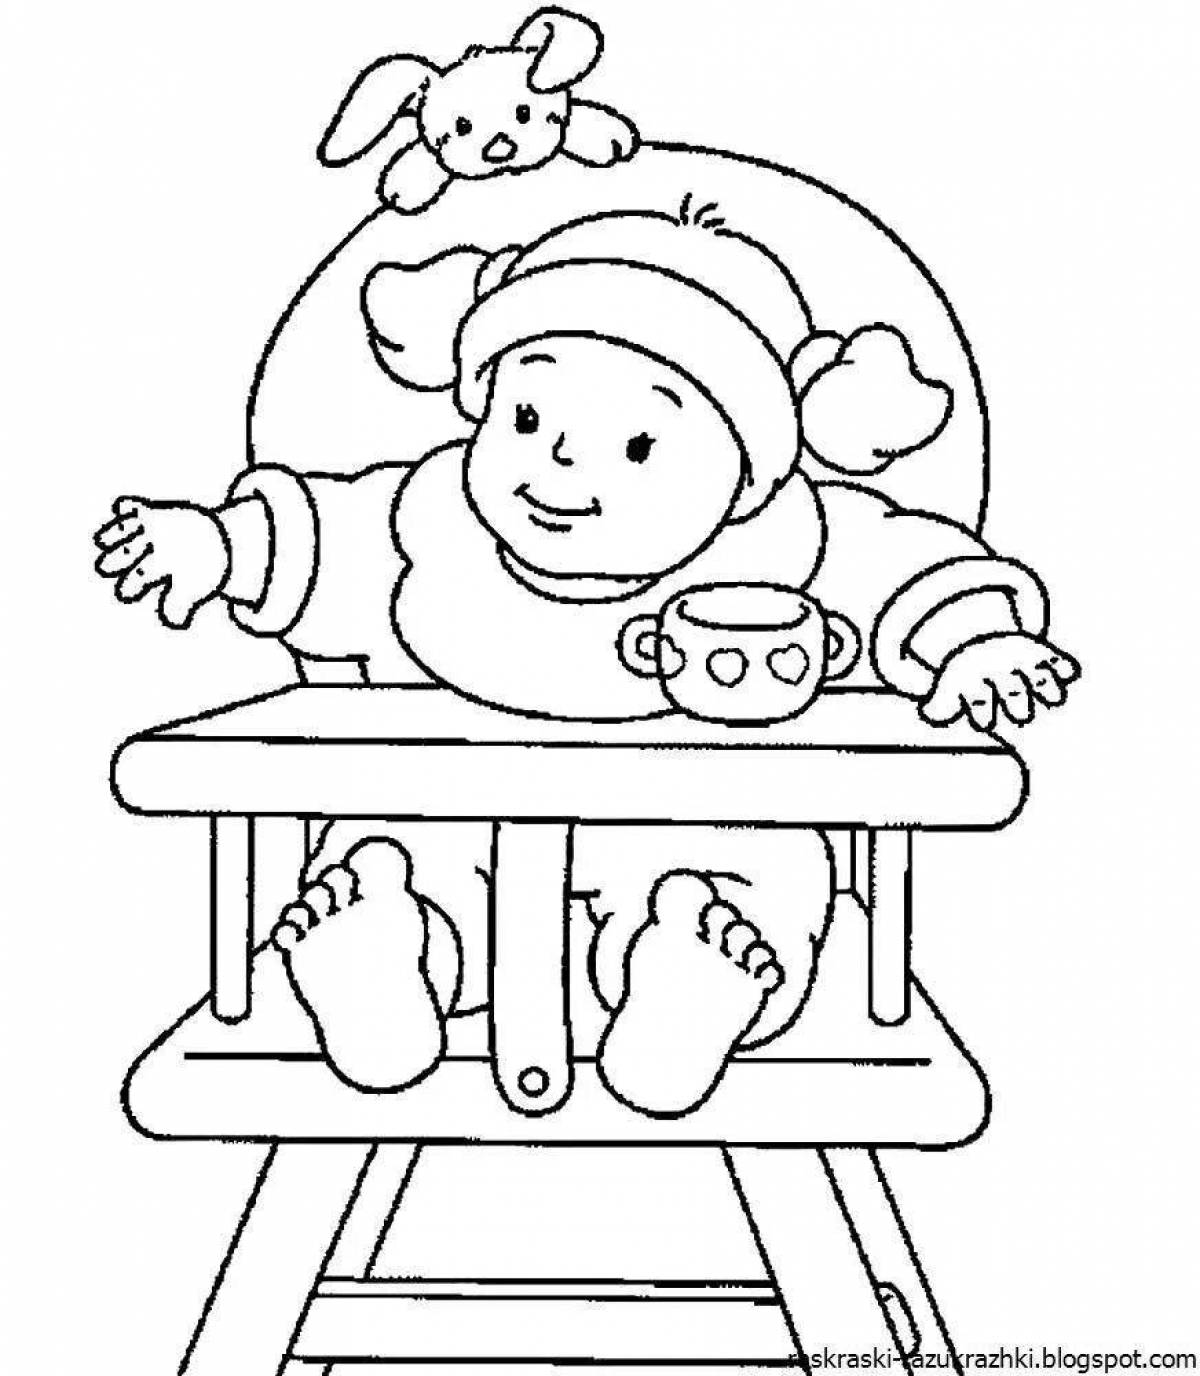 Colorful coloring pages for dolls